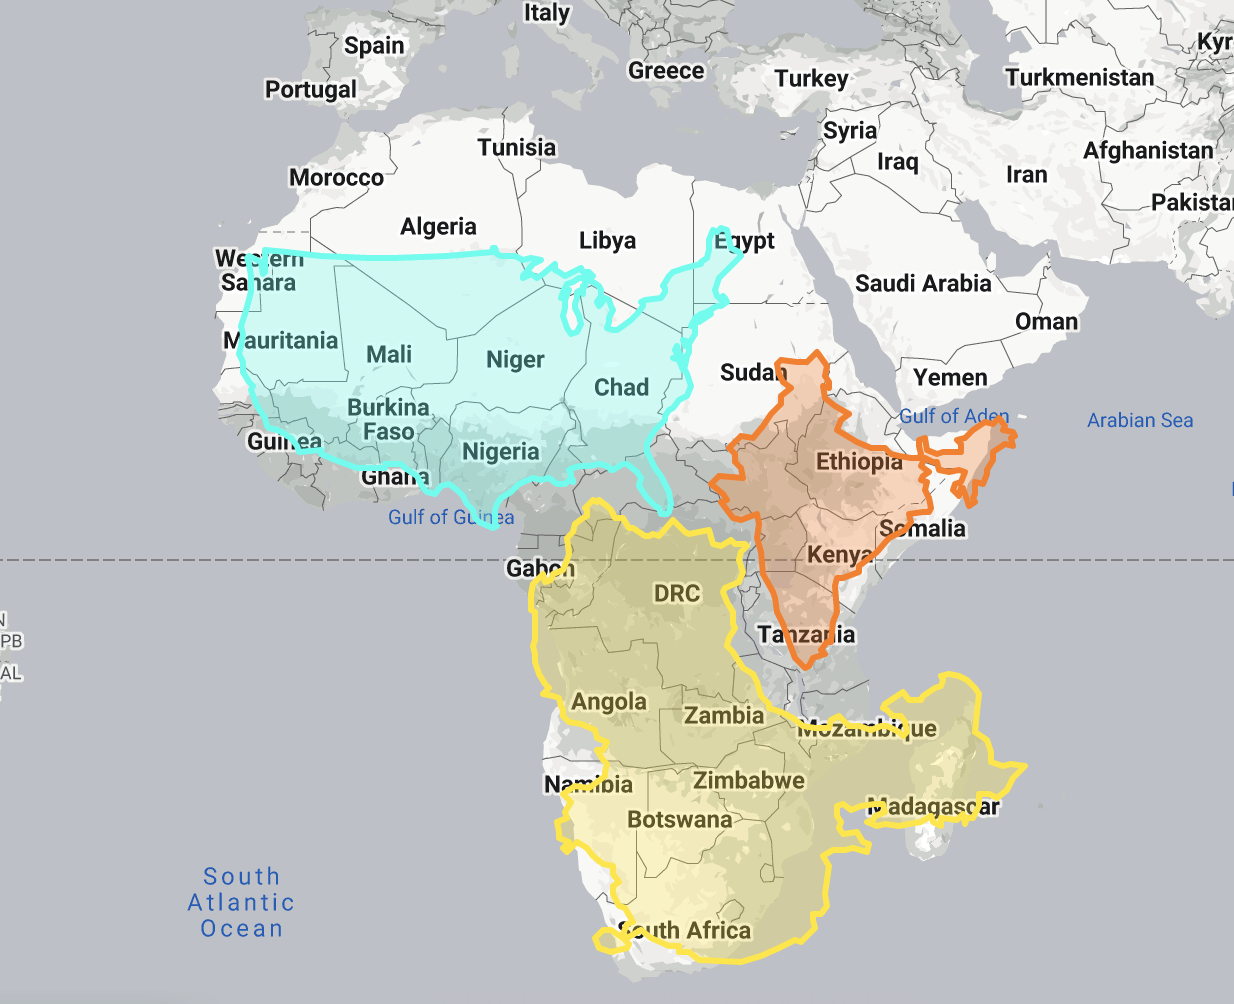 Africa with outlines of the US, China, and India photoshopped on top to show they all fit inside the continent